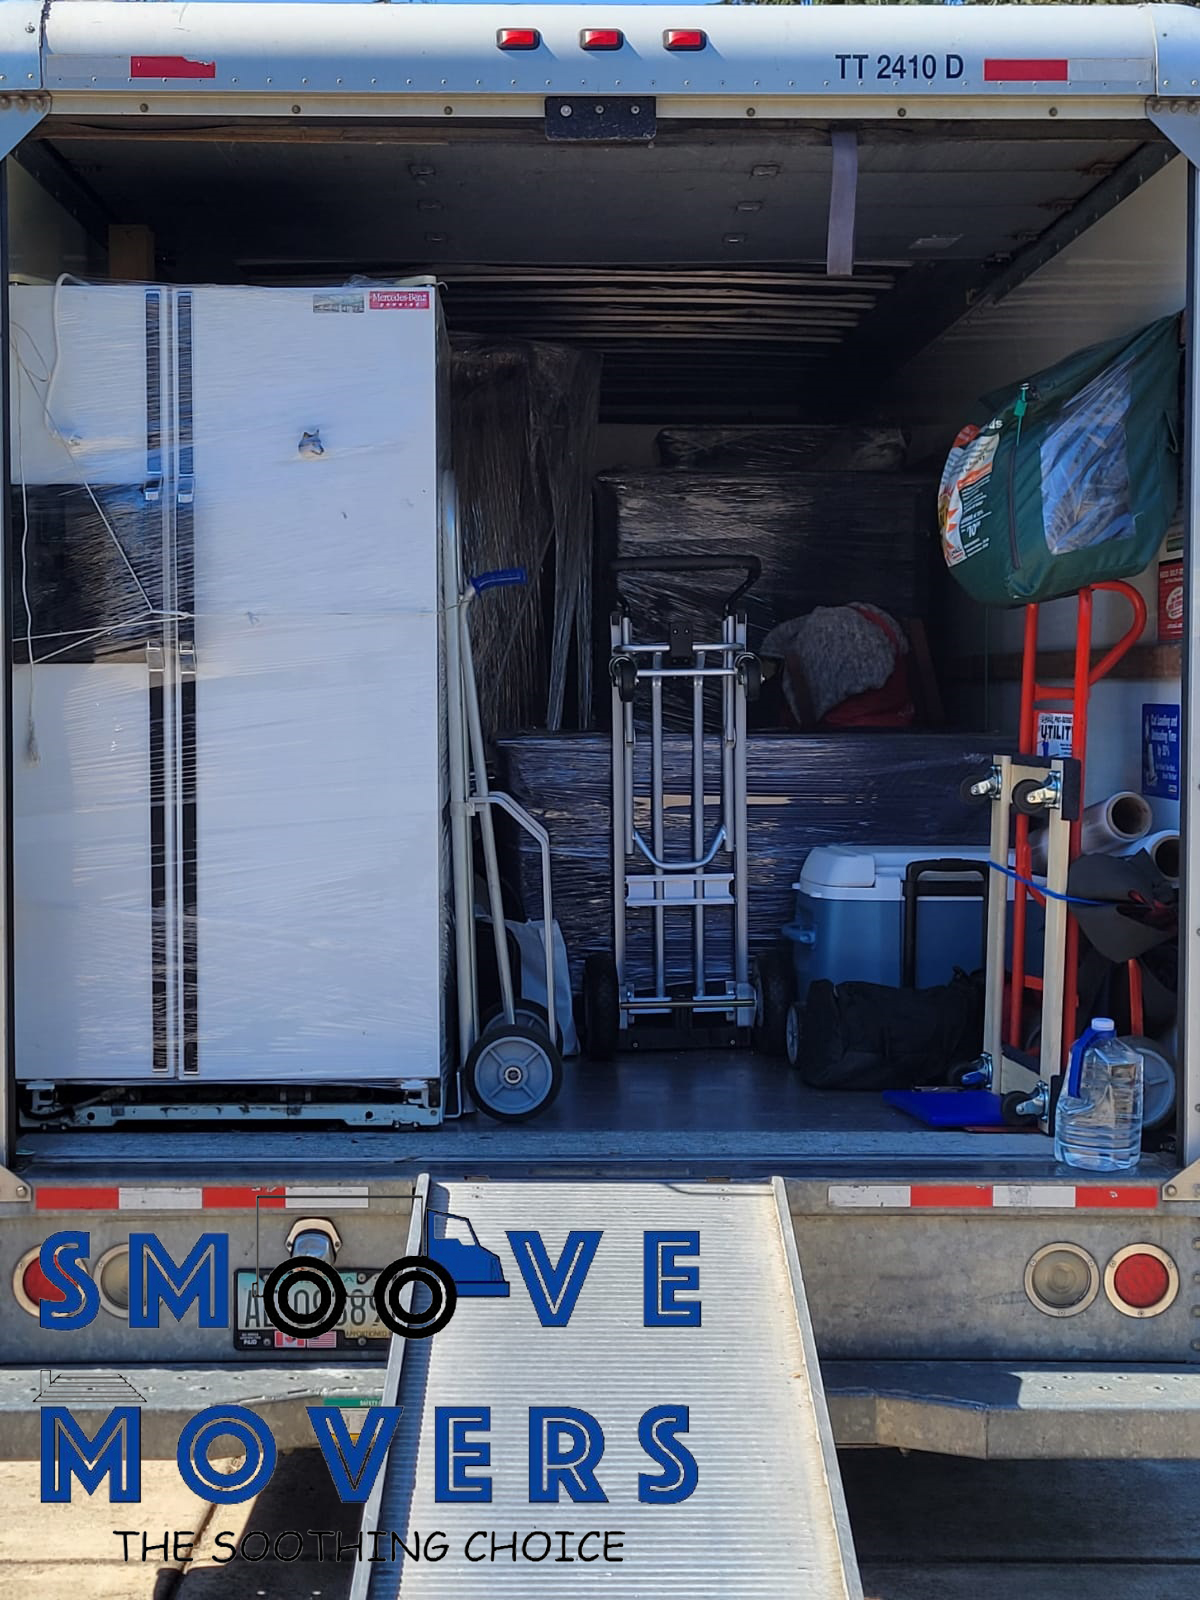 smoove movers unloading large boxes